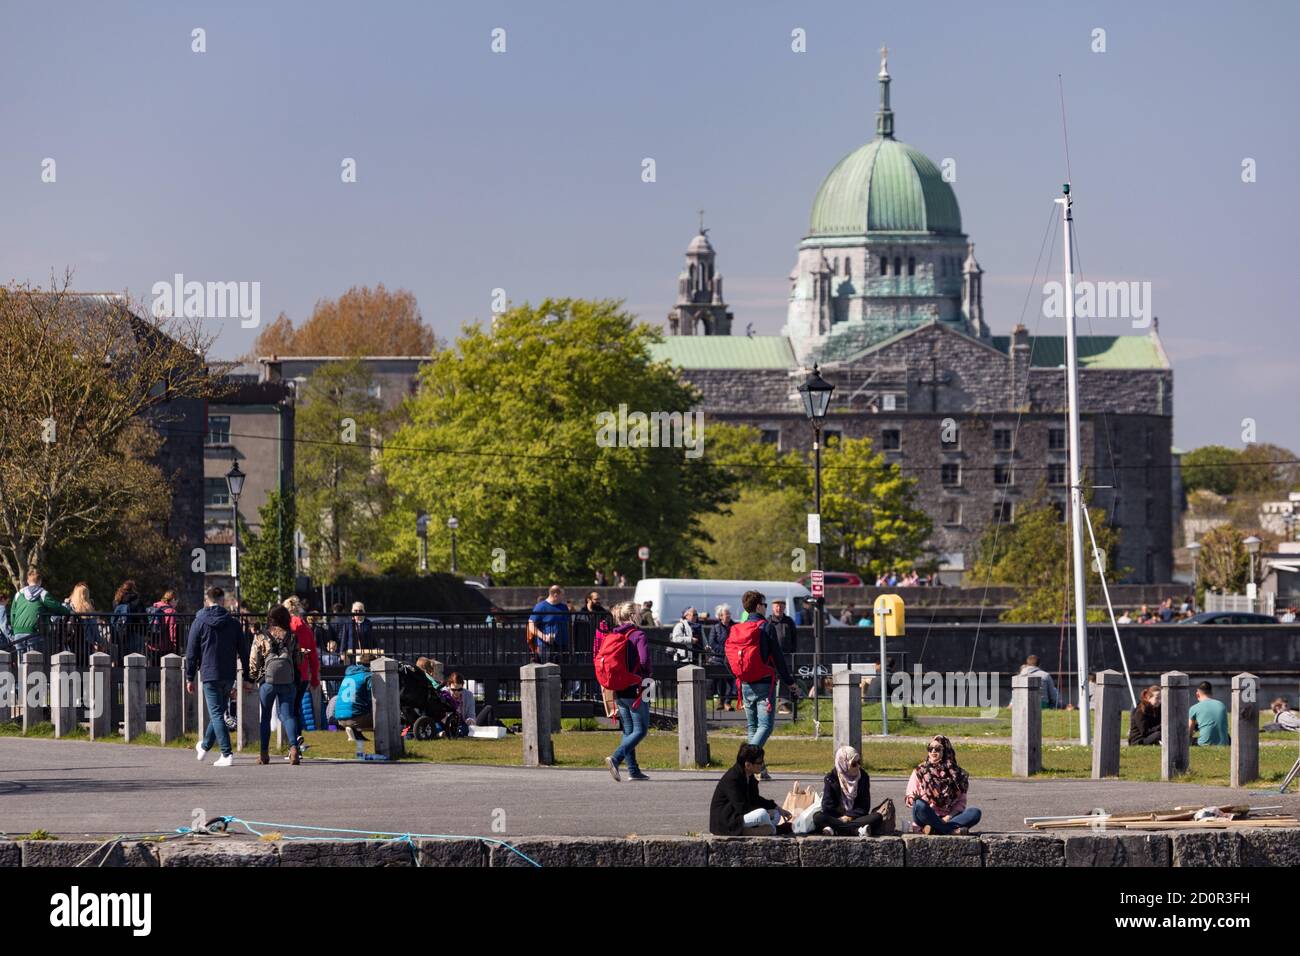 GALWAY CITY, IRELAND - 5th May, 2018: People enjoying a sunny spring day along the bank of Corrib river in the Claddagh area of Galway city, View of G Stock Photo